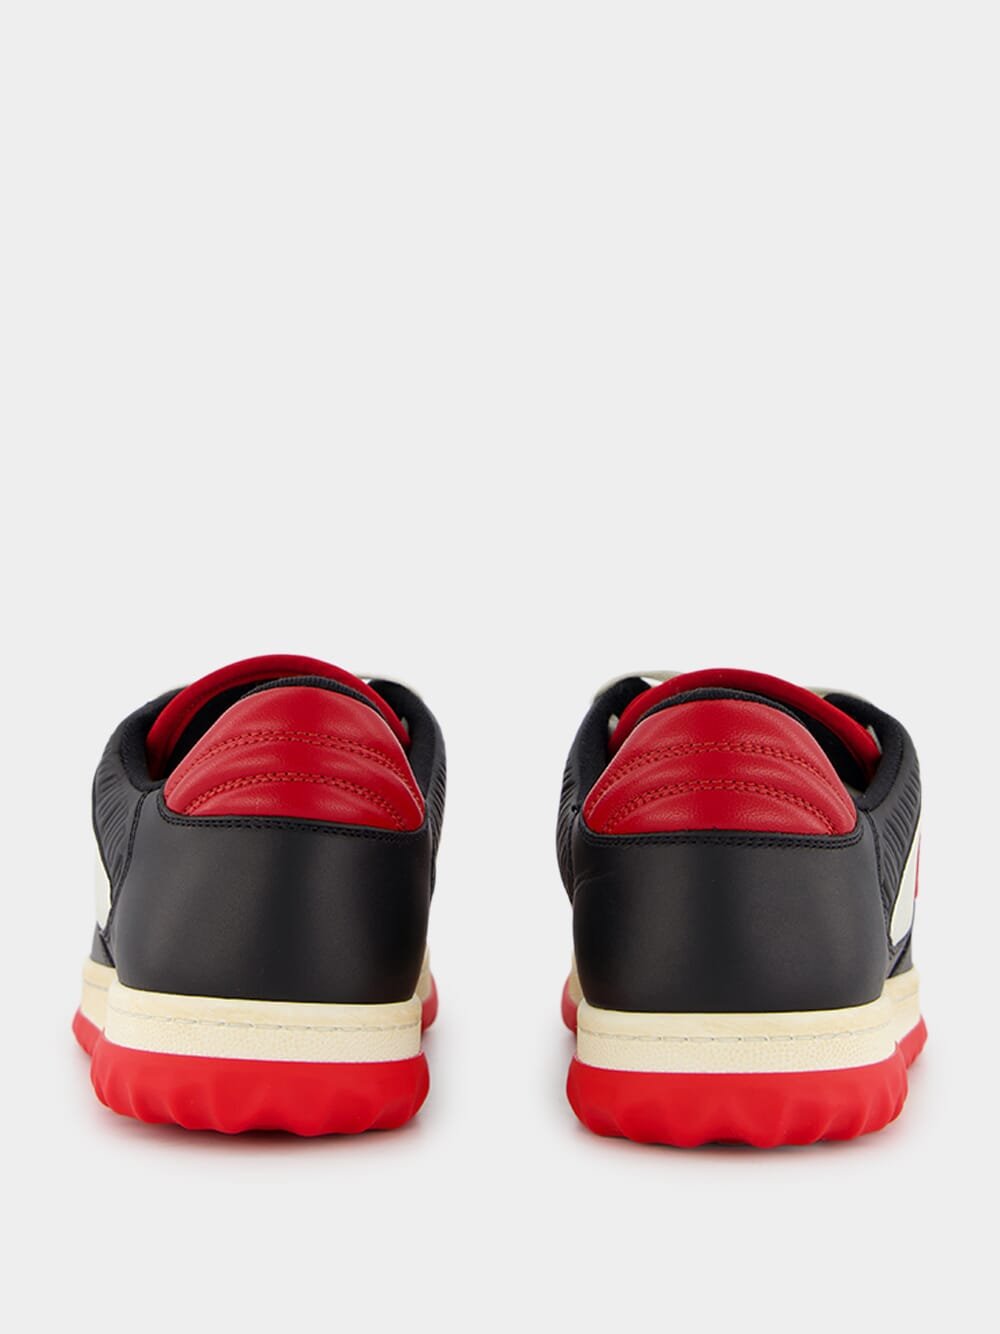 GucciMAC80 Chunky Sneakers at Fashion Clinic